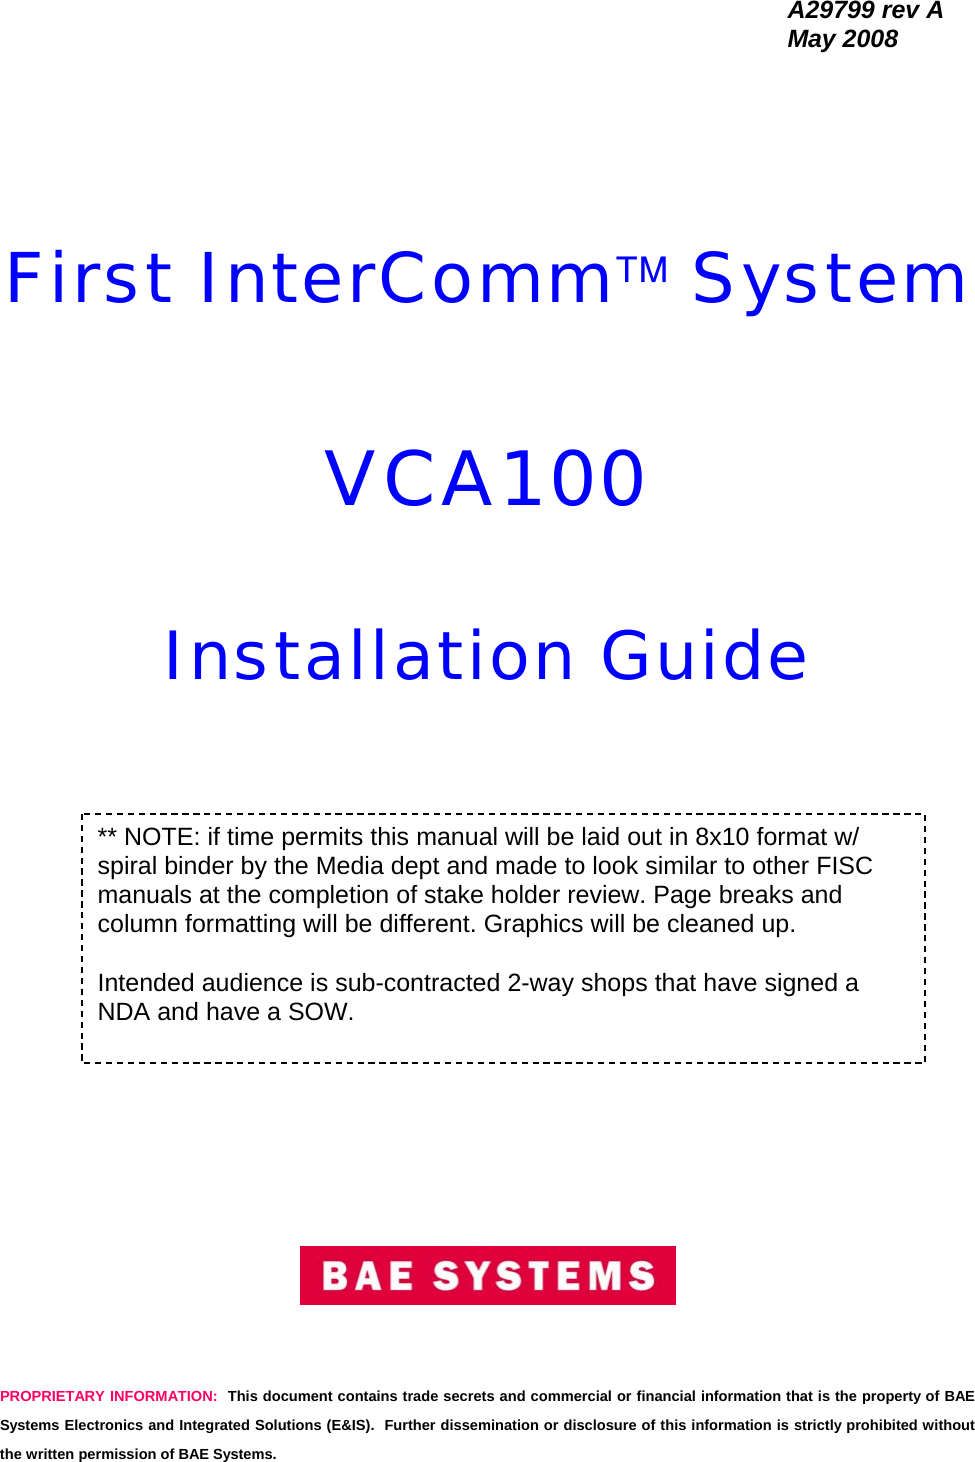   A29799 rev A  May 2008 PROPRIETARY INFORMATION:  This document contains trade secrets and commercial or financial information that is the property of BAE Systems Electronics and Integrated Solutions (E&amp;IS).  Further dissemination or disclosure of this information is strictly prohibited without the written permission of BAE Systems.        First InterComm™ System  VCA100   Installation Guide                      ** NOTE: if time permits this manual will be laid out in 8x10 format w/ spiral binder by the Media dept and made to look similar to other FISC manuals at the completion of stake holder review. Page breaks and column formatting will be different. Graphics will be cleaned up.  Intended audience is sub-contracted 2-way shops that have signed a NDA and have a SOW. 